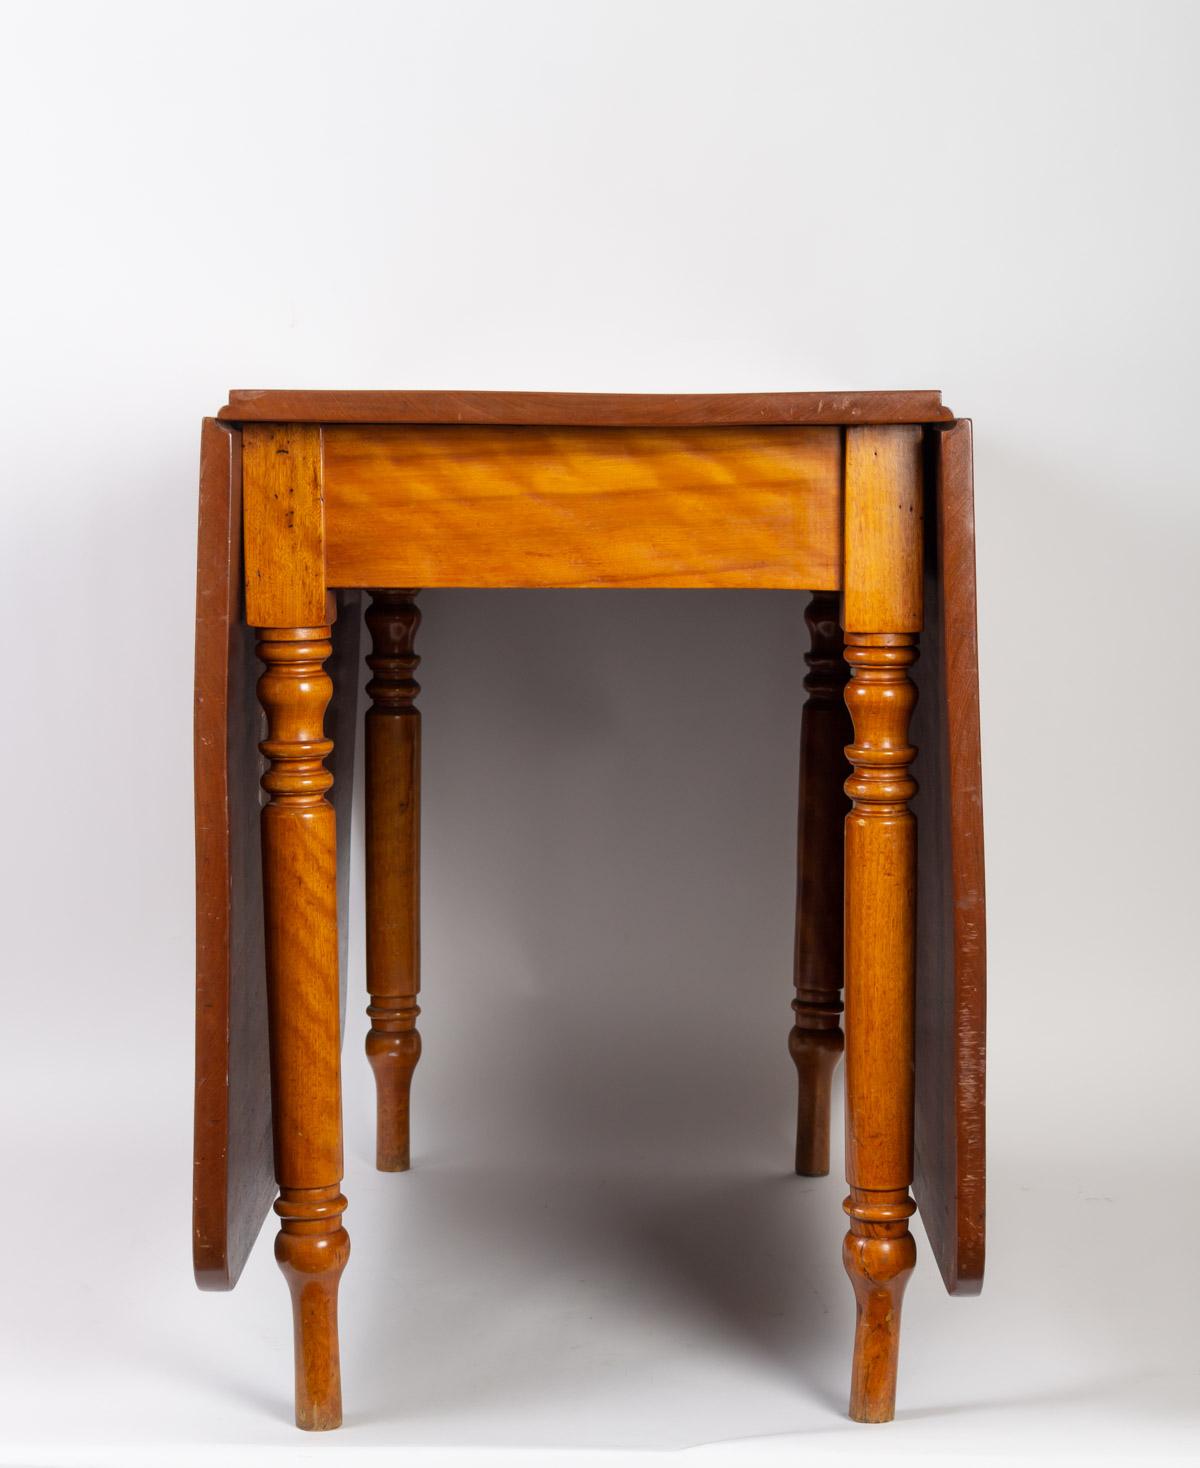 Walnut shutter table from the 19th century.

Measures: H 72 cm., L closed 47 cm, L open 166 cm.